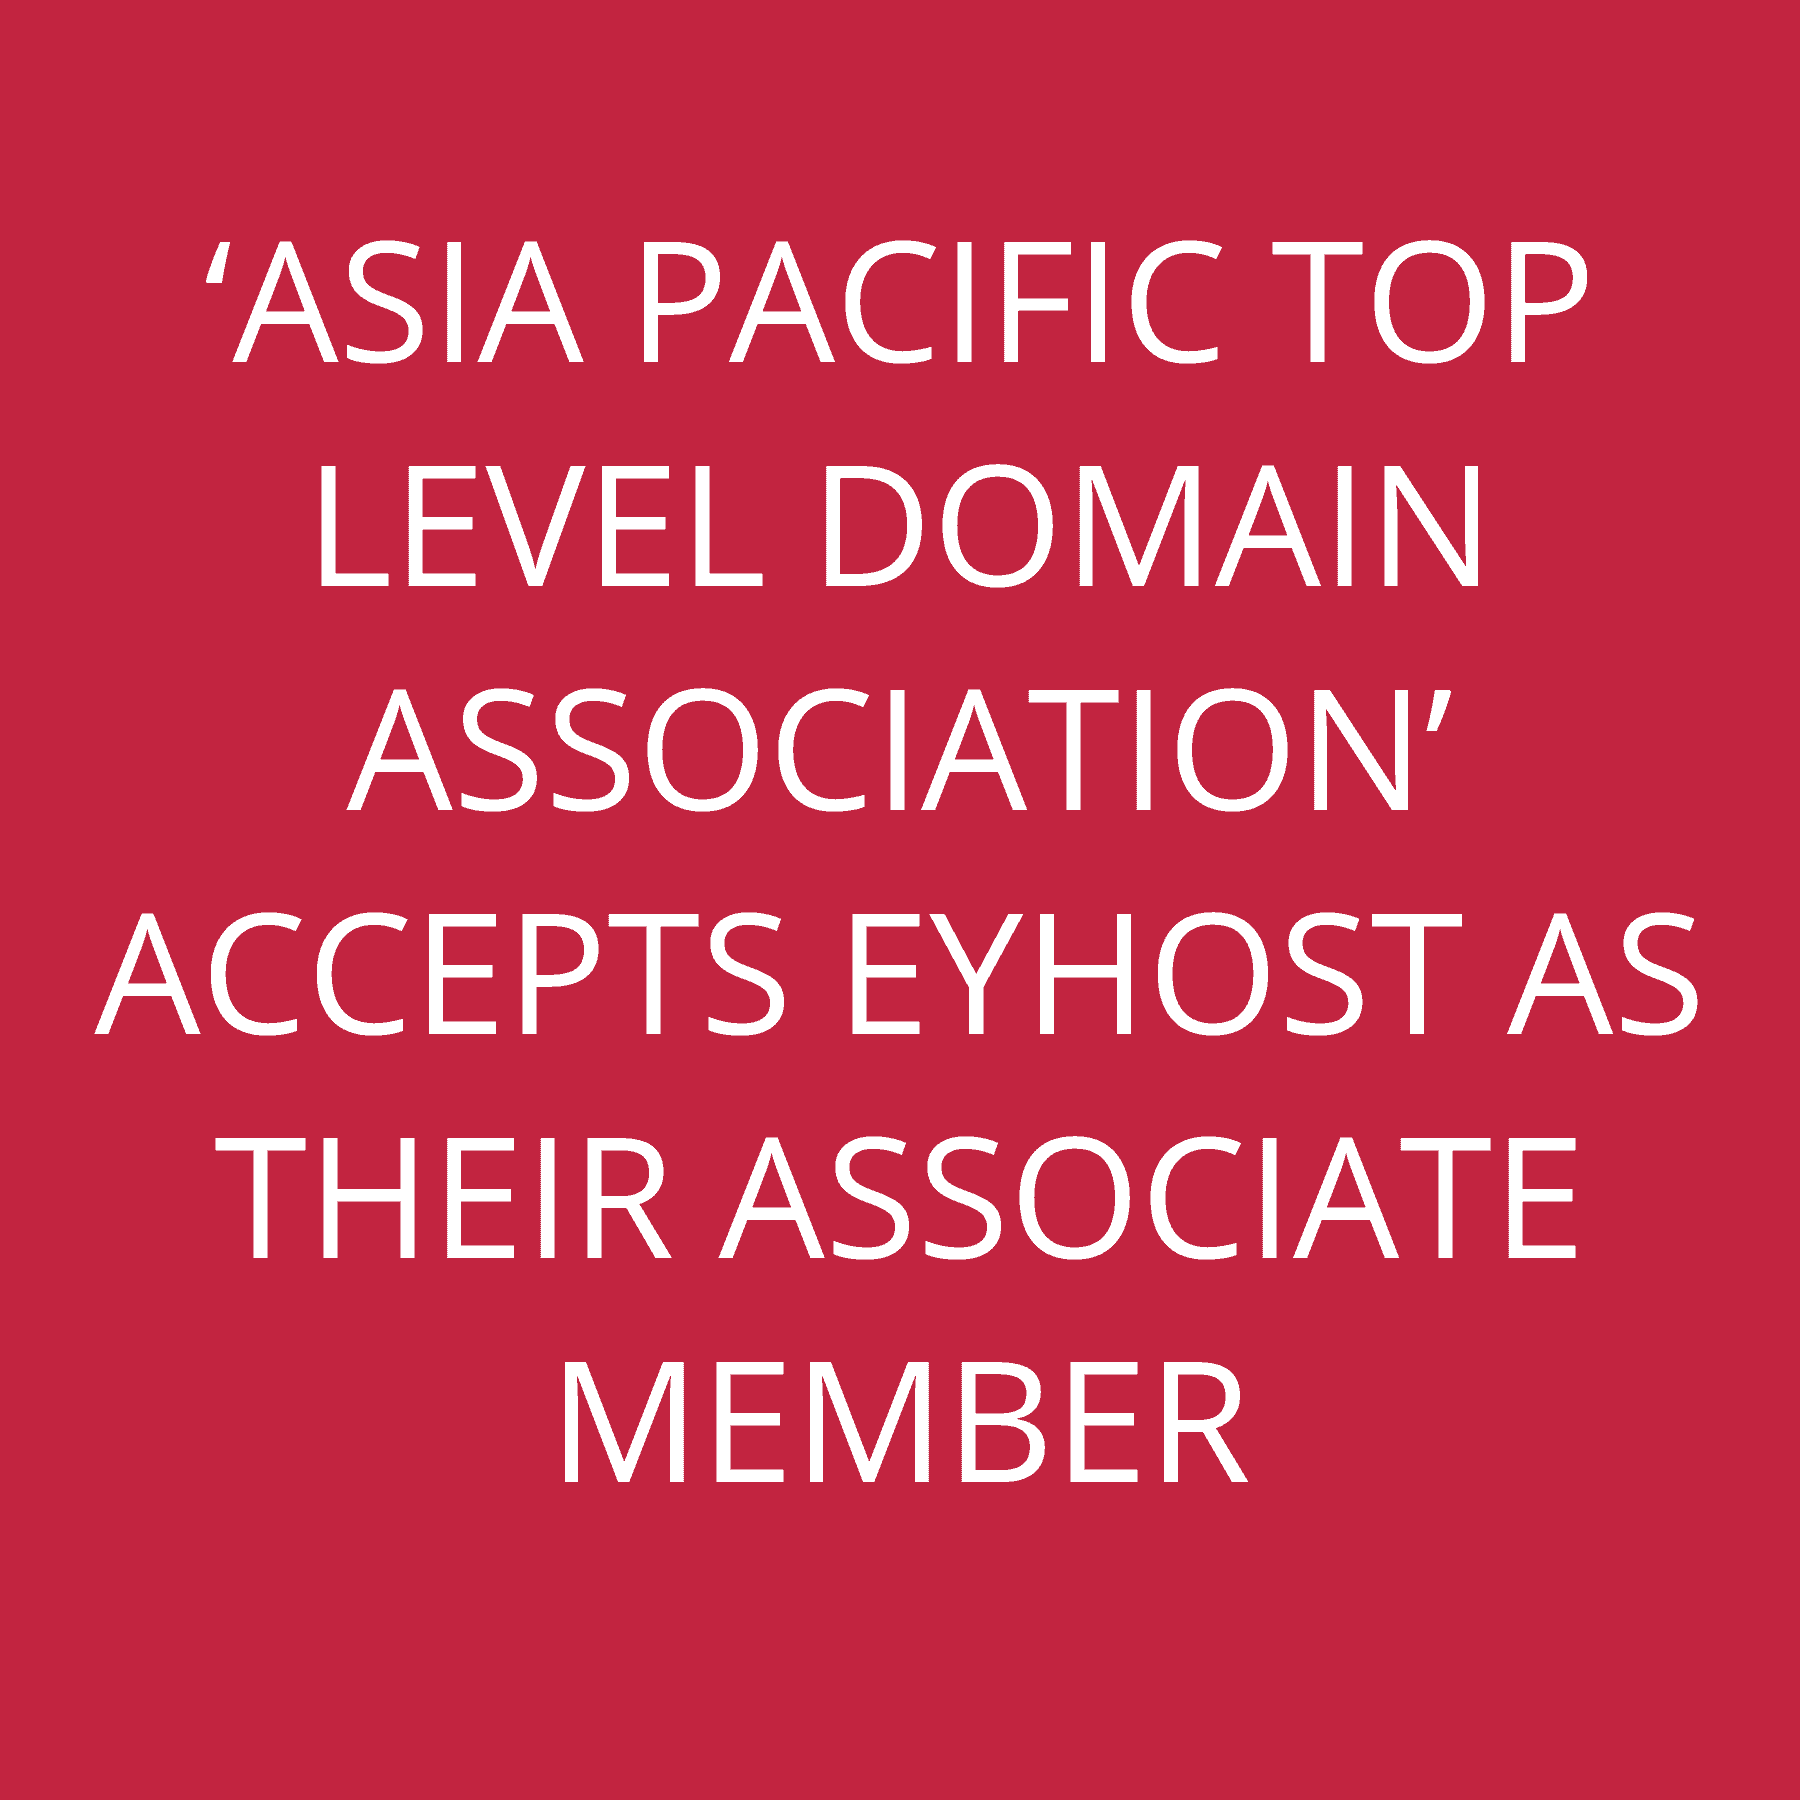 ‘Asia Pacific Top Level Domain Association’ accepts EyHost as their associate member